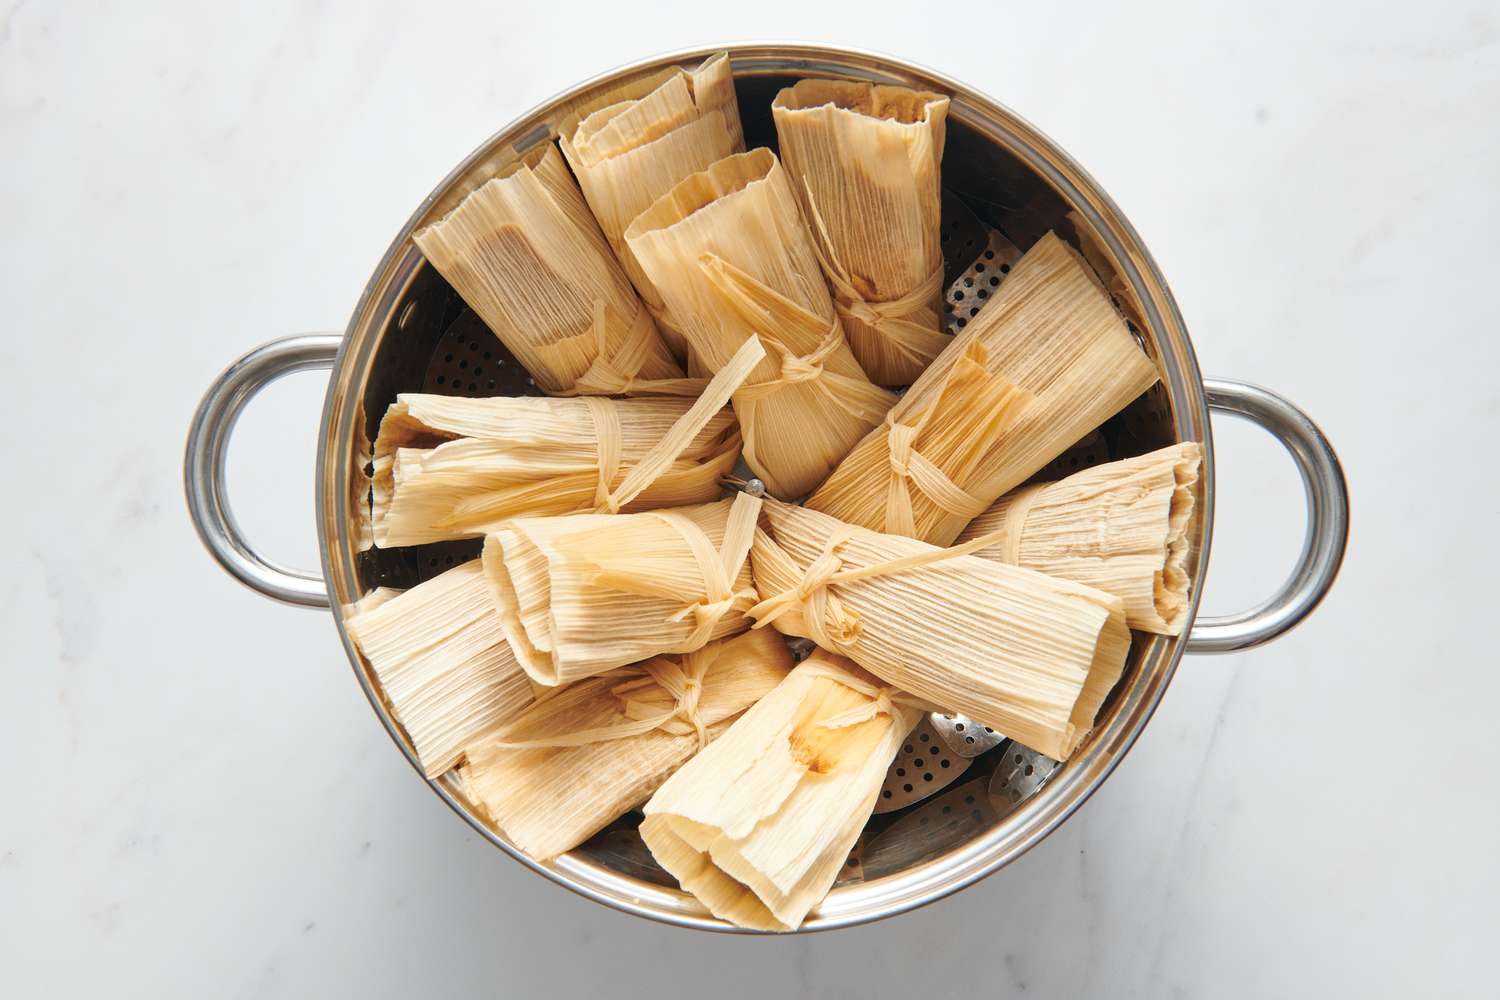 A large steamer basked with tamales standing upright